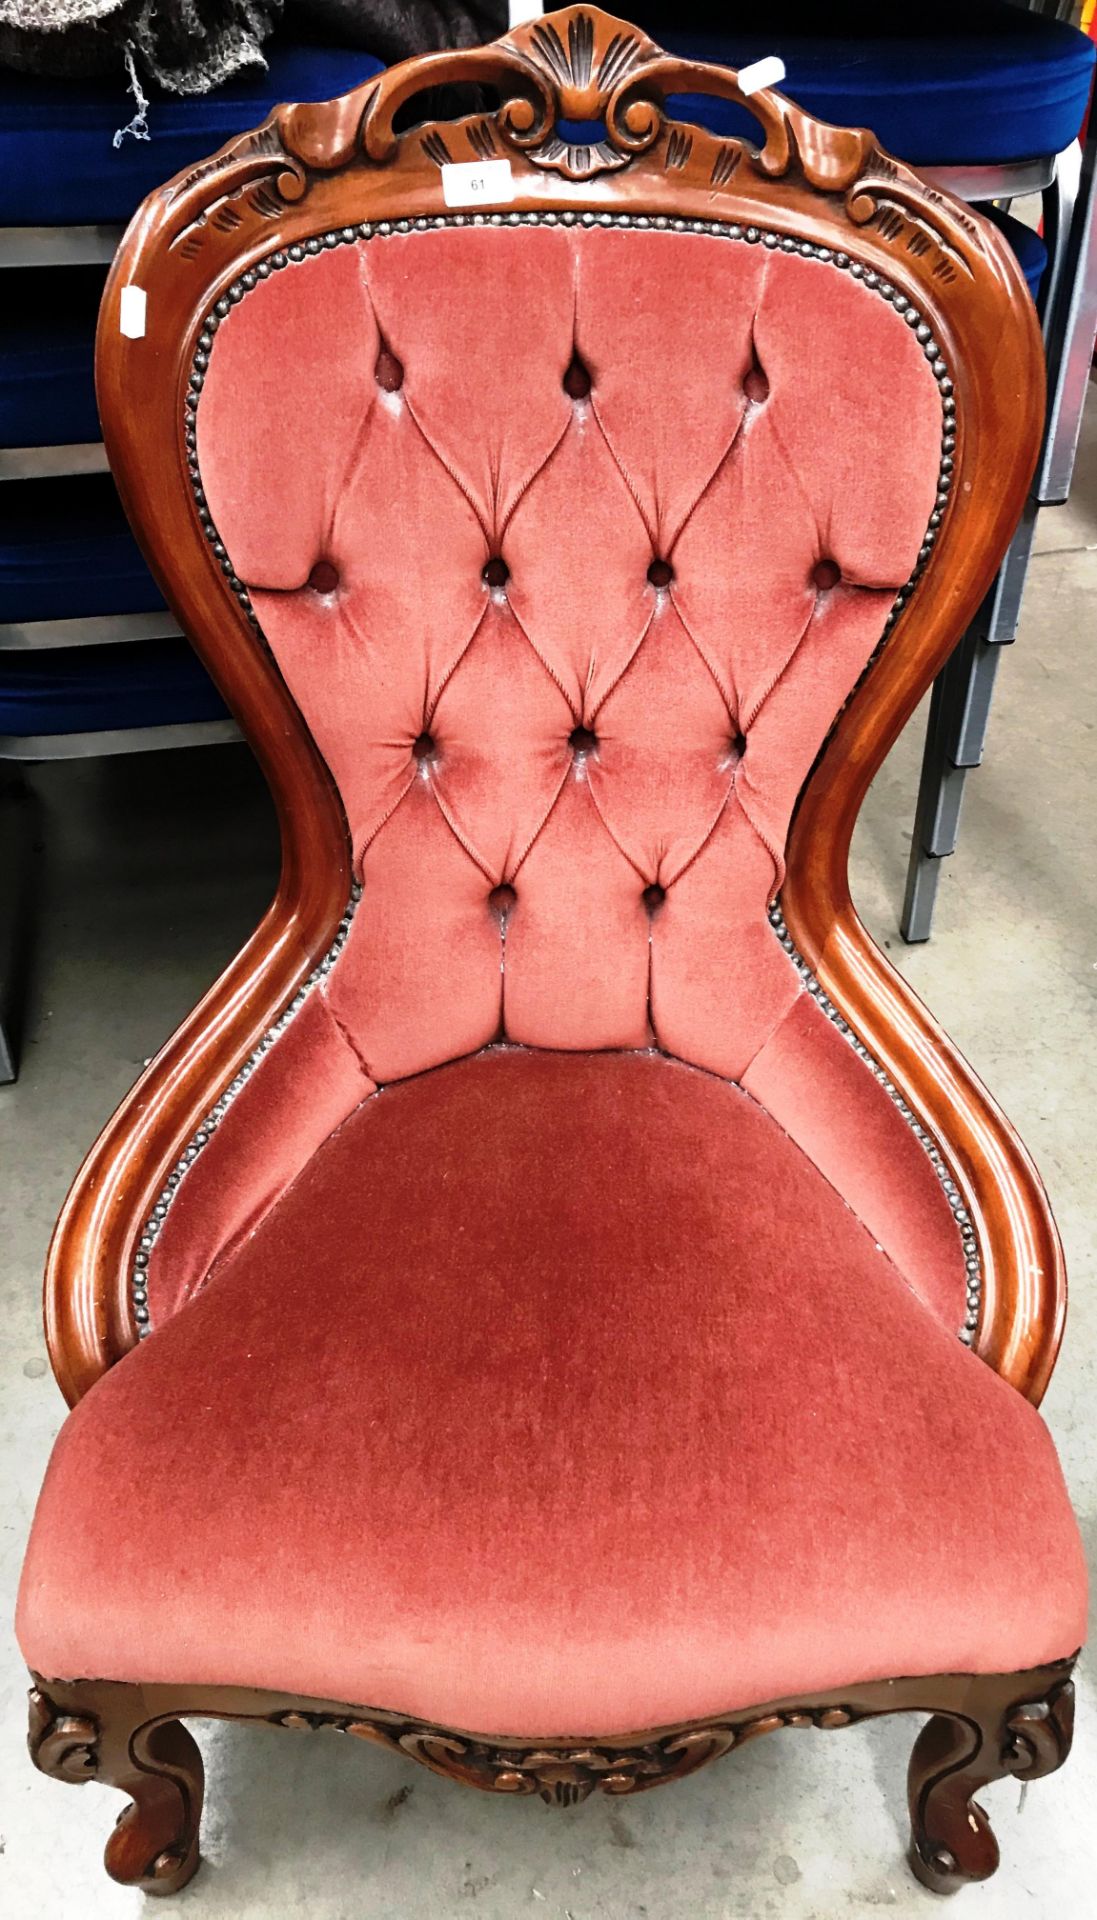 A reproduction mahogany framed nursing chair with pink dralon upholstery